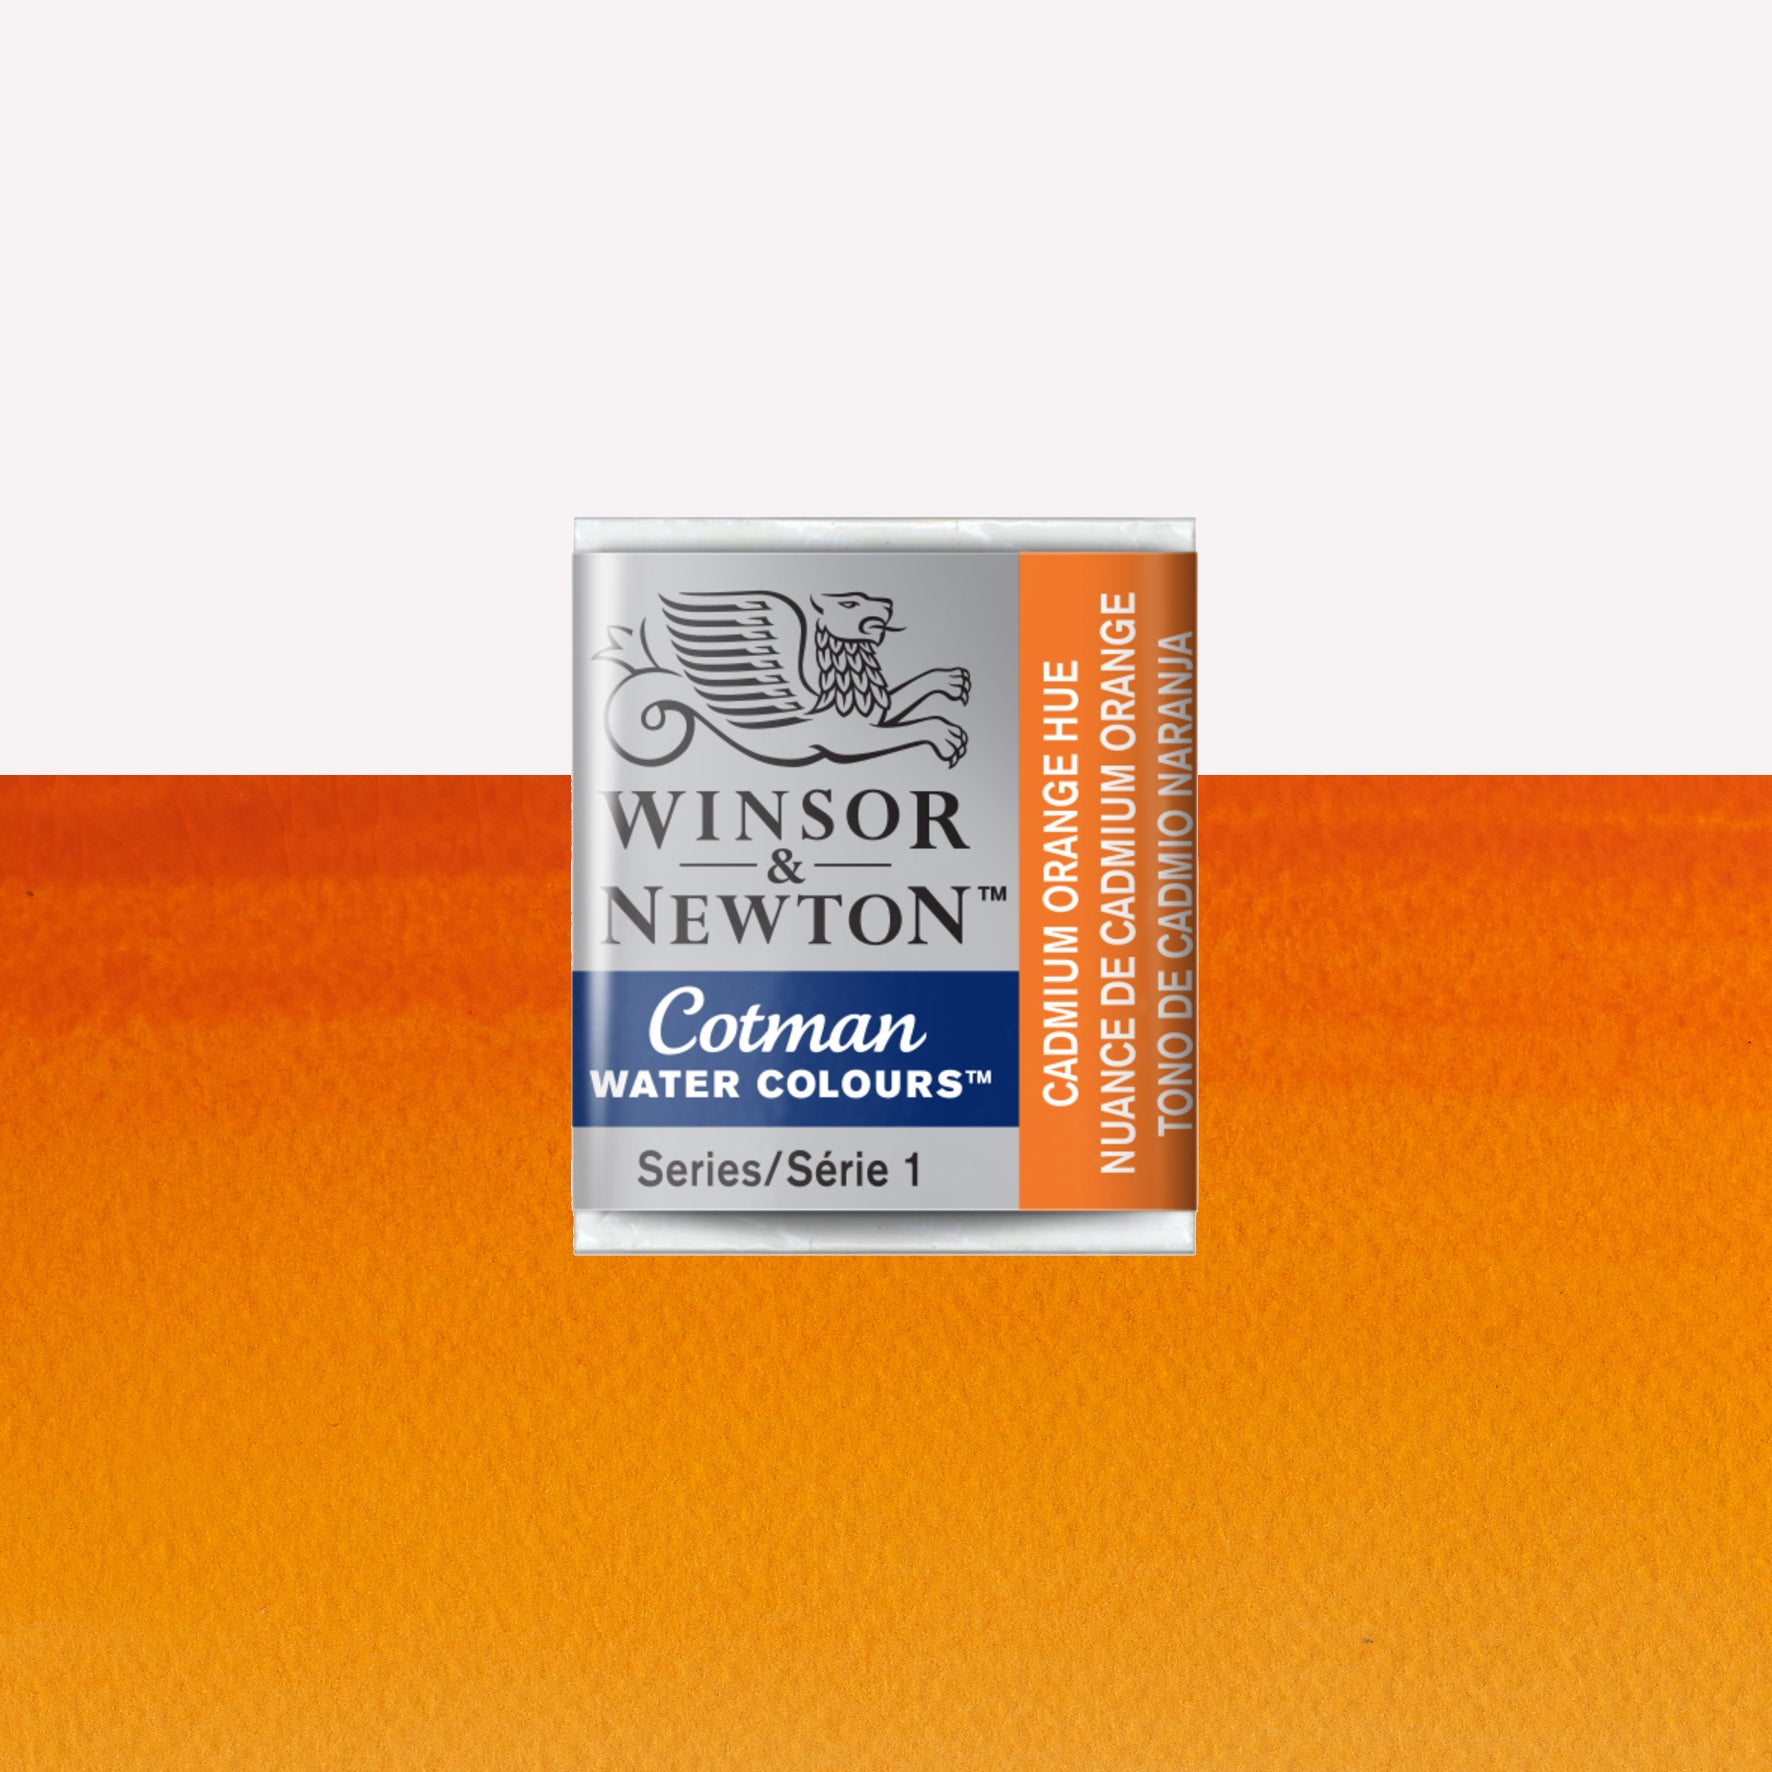 Winsor & Newton Cotman watercolour half pan in the shade Cadmium Orange Hue over a vibrant colour swatch. These half pans have a solid formula and are packaged in compressed paint cake. 